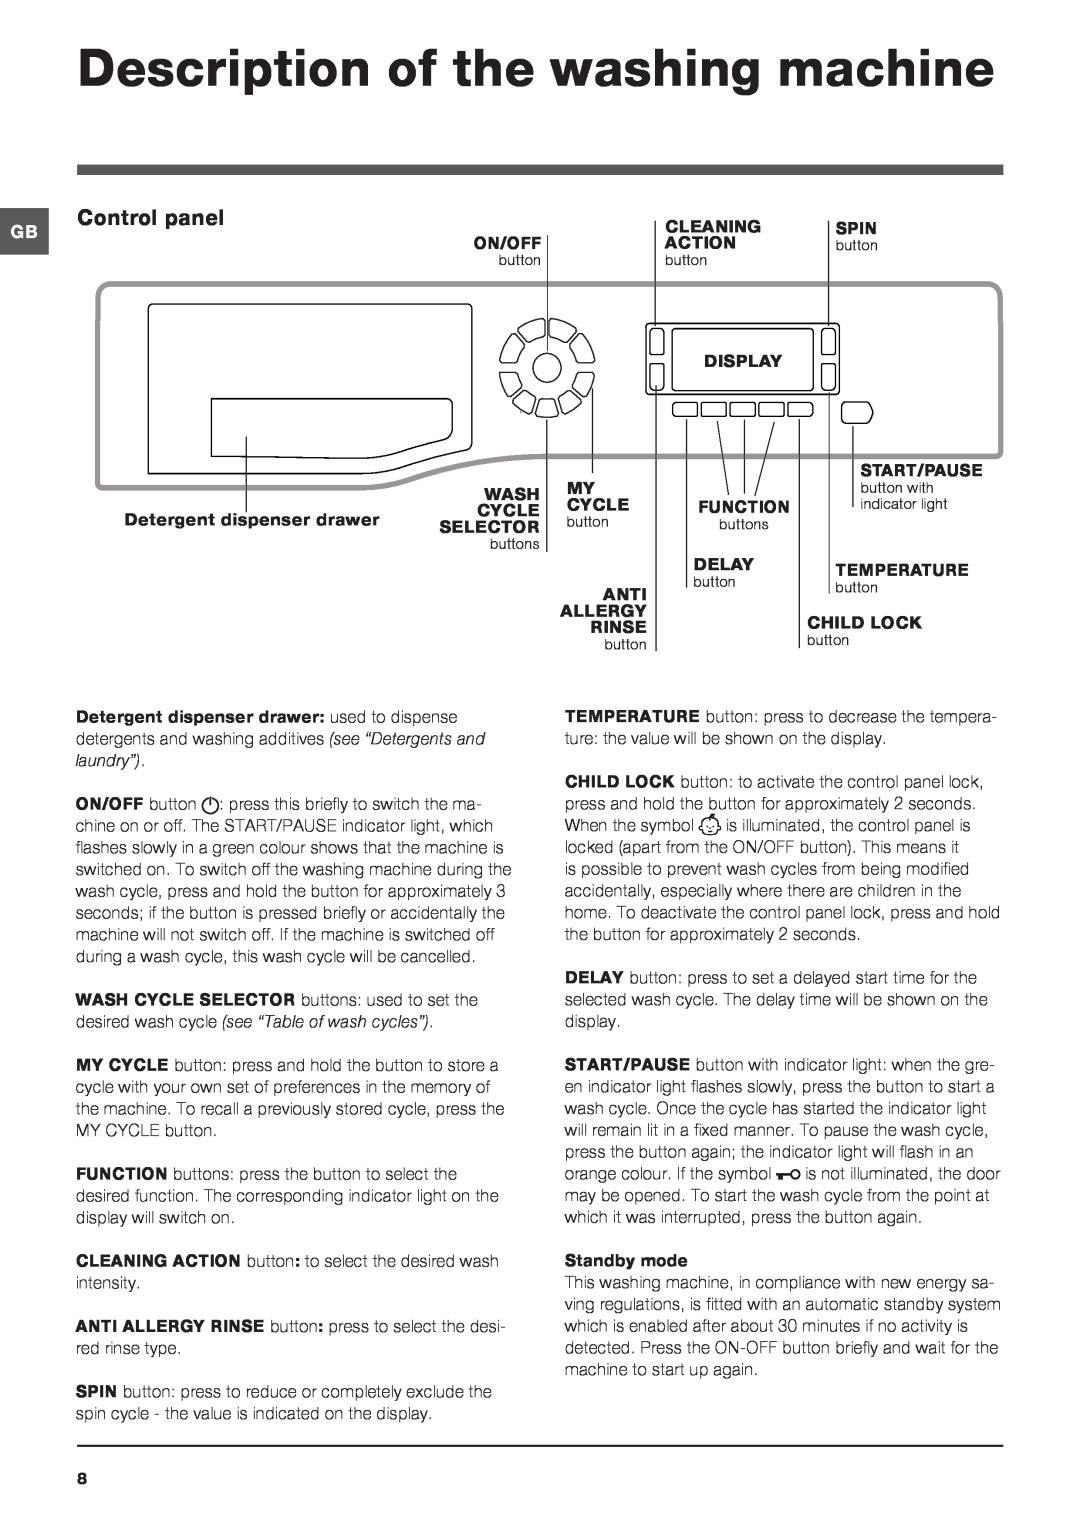 Hotpoint ULTIMA manual Description of the washing machine, Control panel 